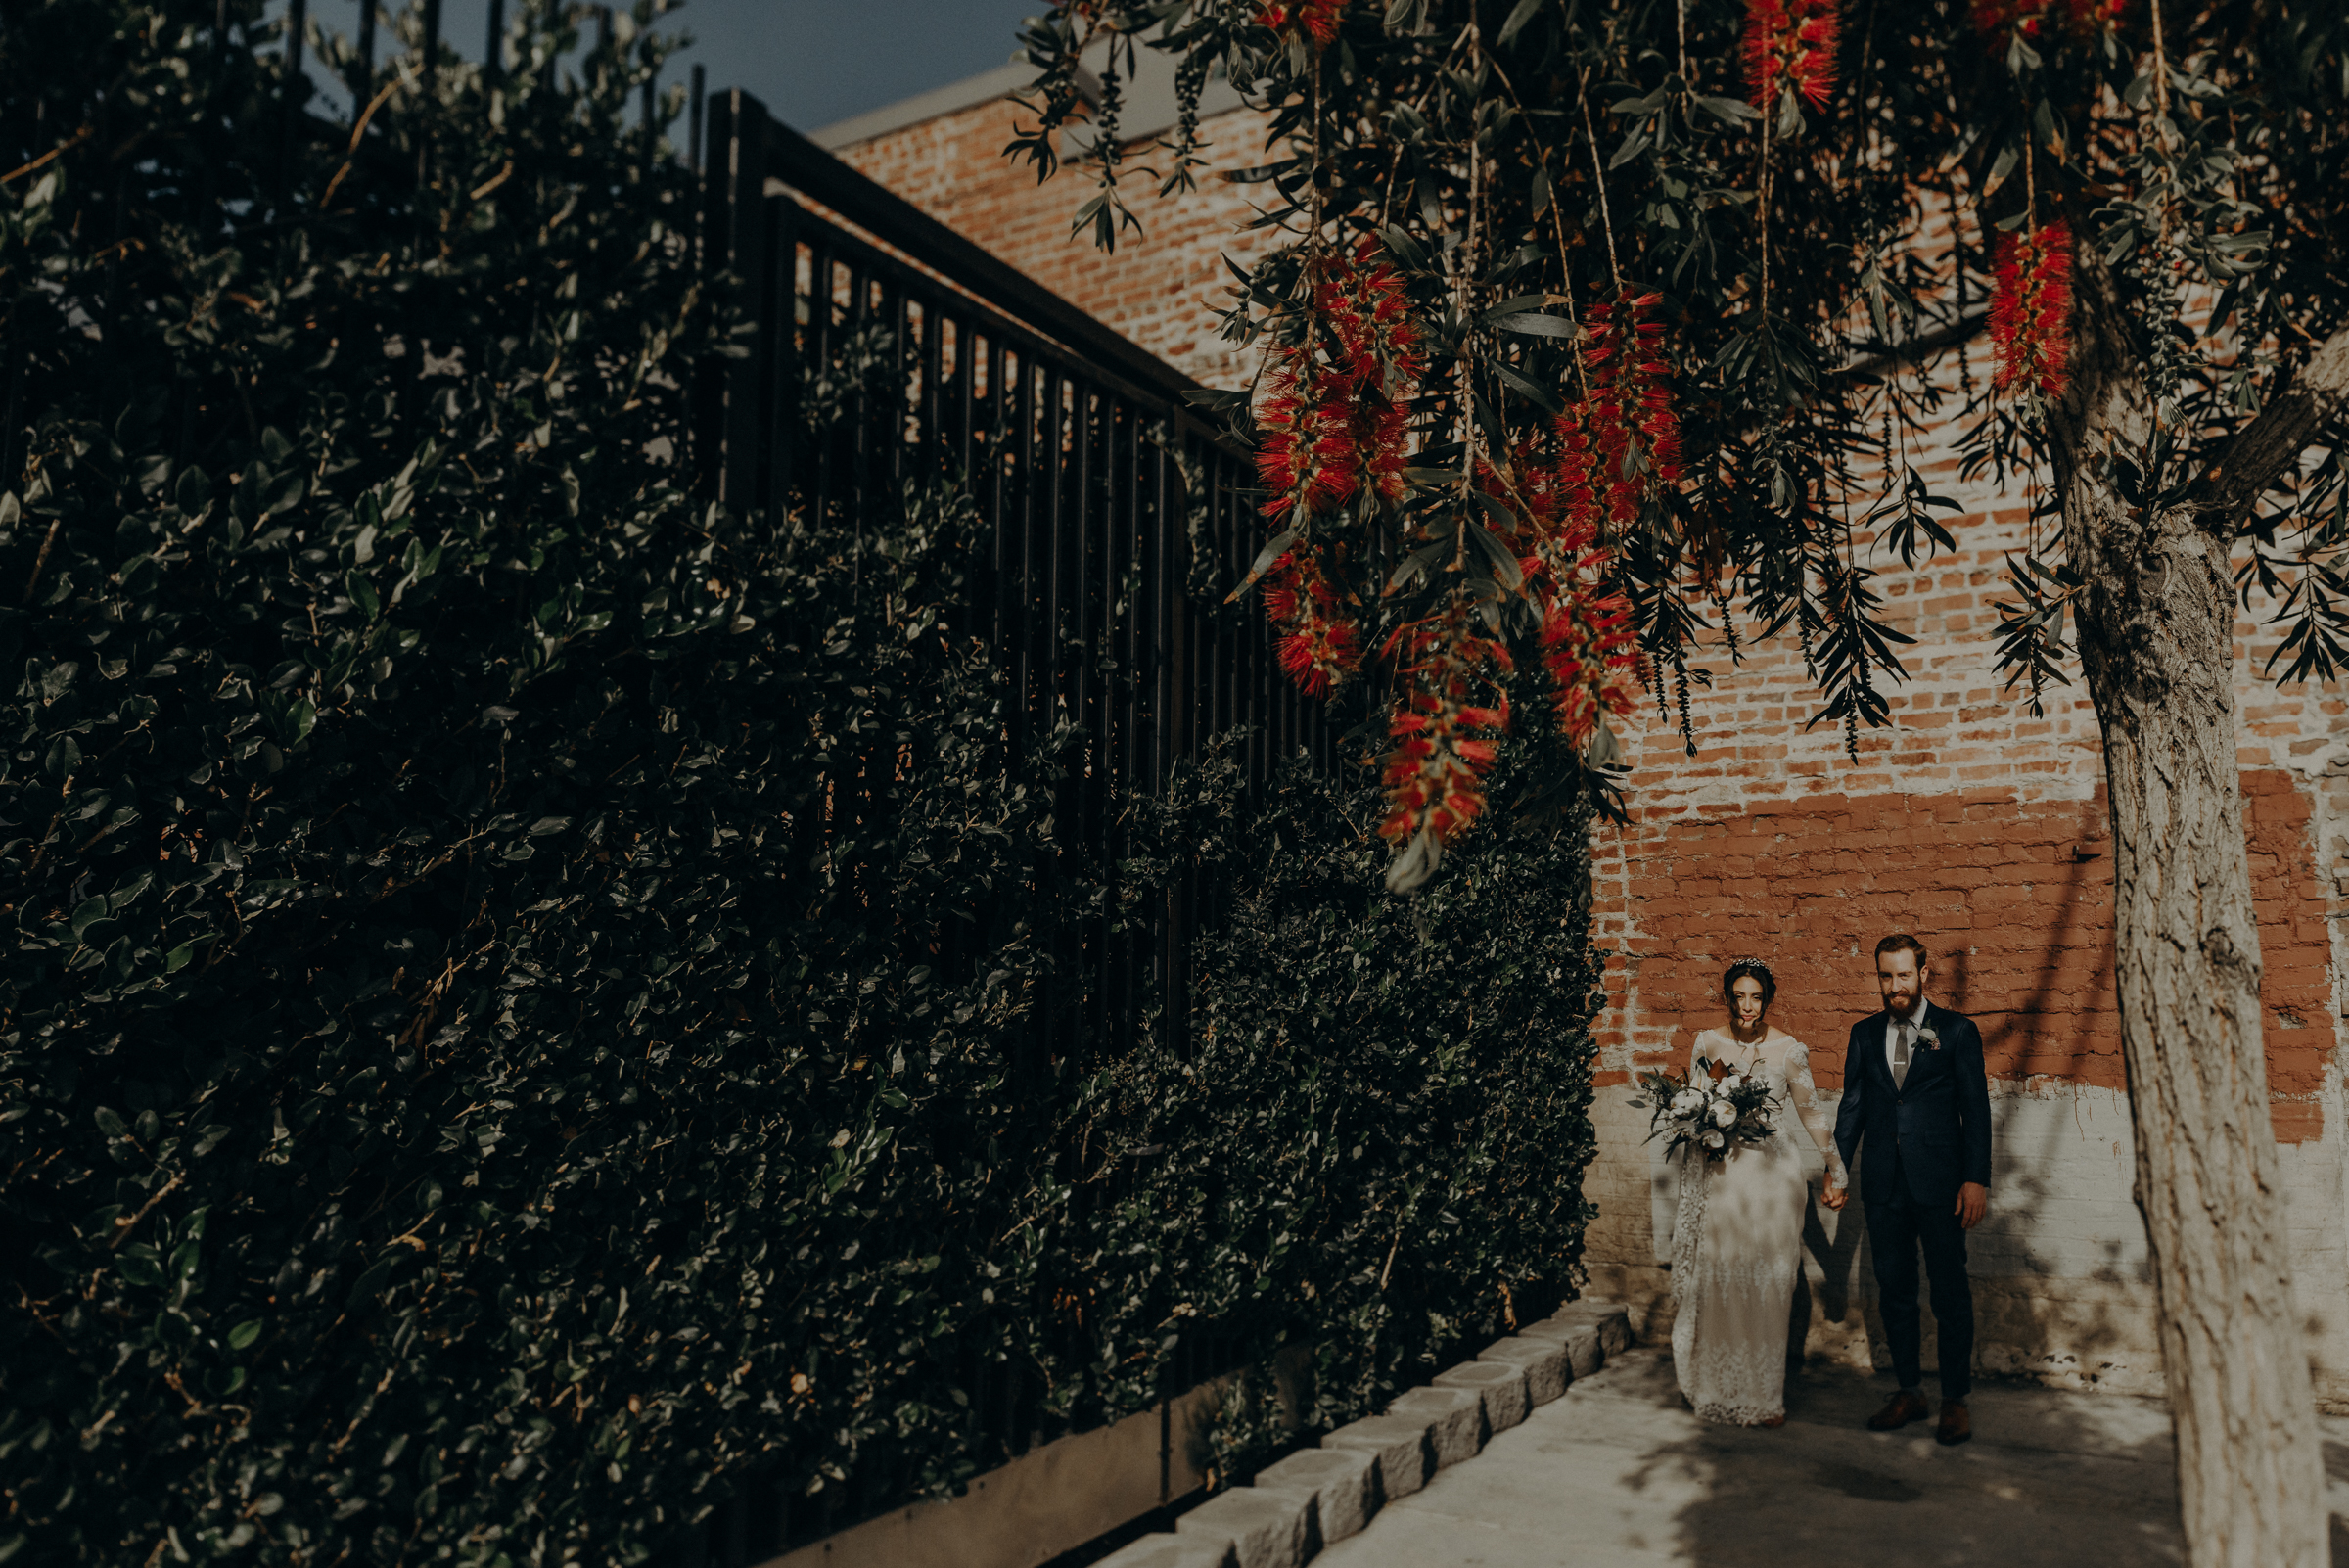 Isaiah + Taylor Photography - The Unique Space Wedding, Los Angeles Wedding Photography 081.jpg